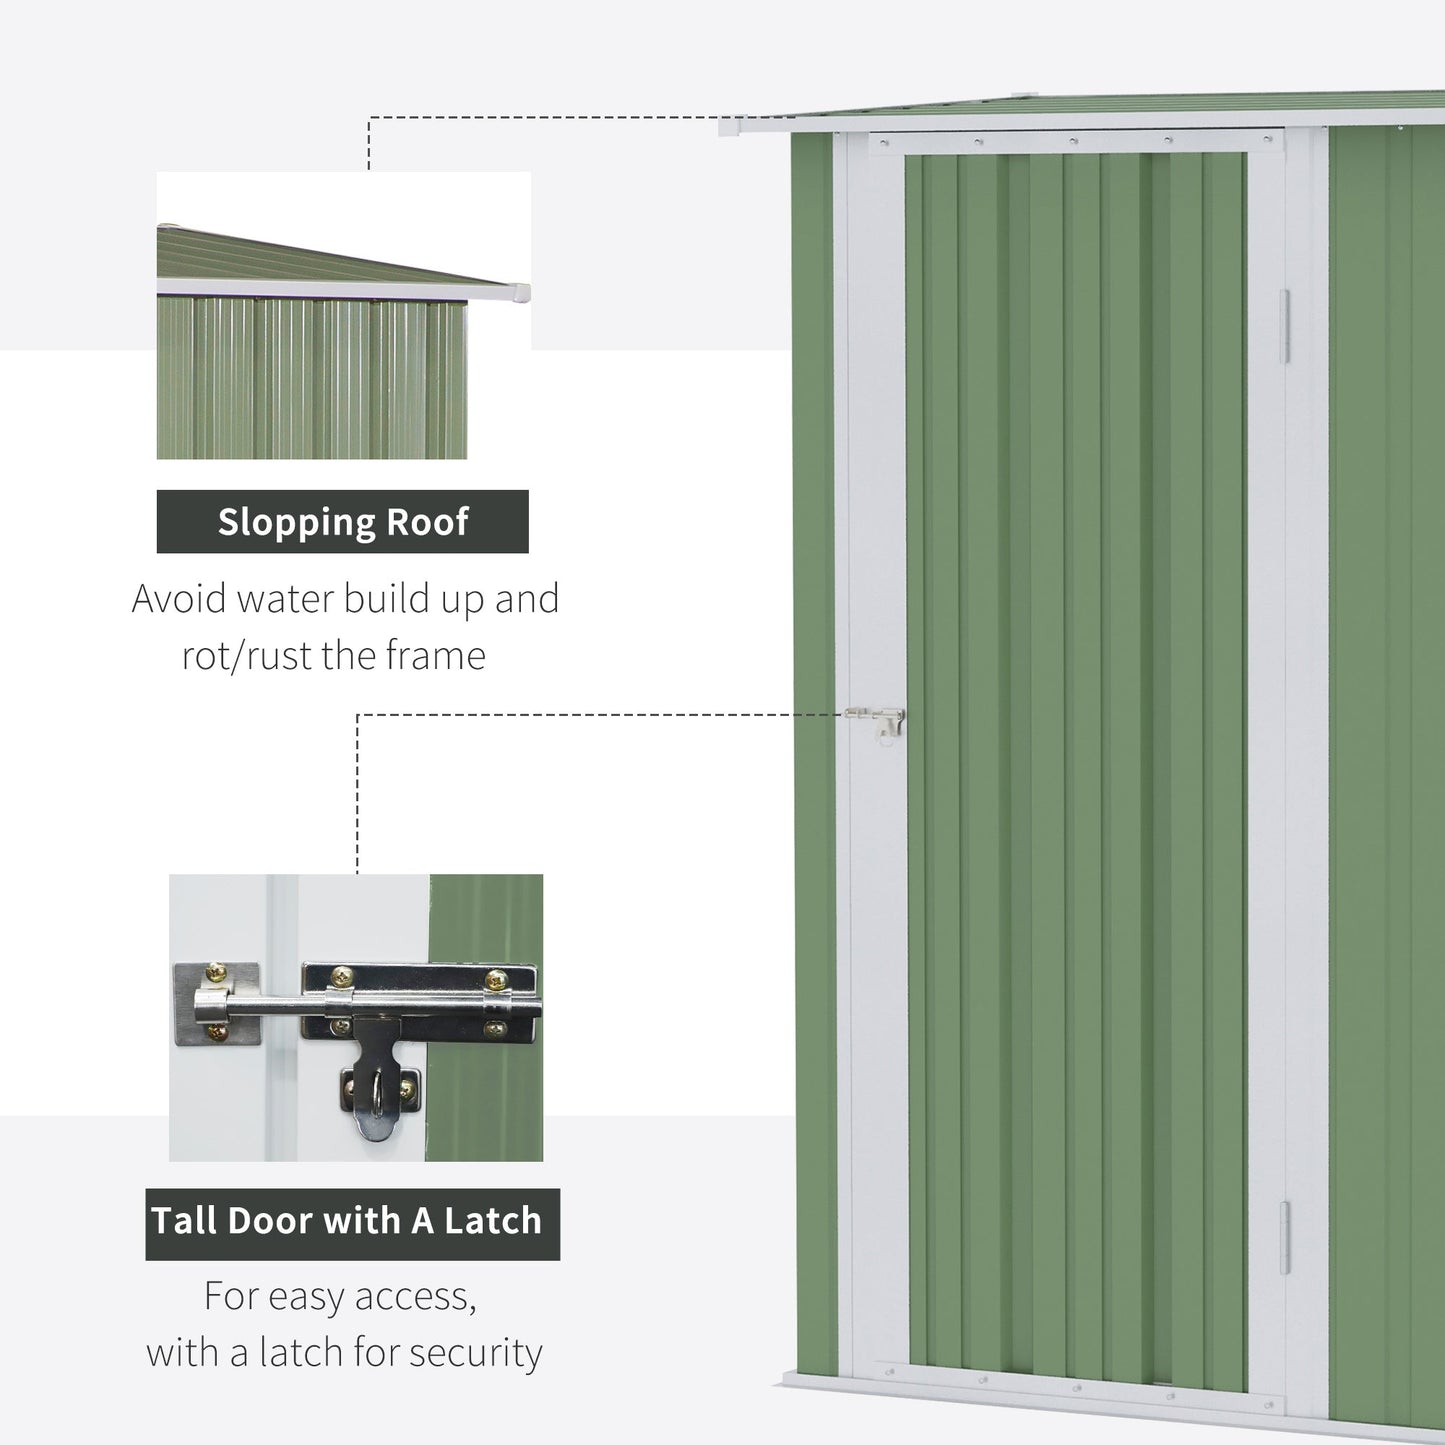 Outdoor and Garden-5' x 3' Storage Metal Shed, Patio Tool Shed Cabinet with Lockable Door for Backyard, Patio, Lawn Green, Garage - Outdoor Style Company